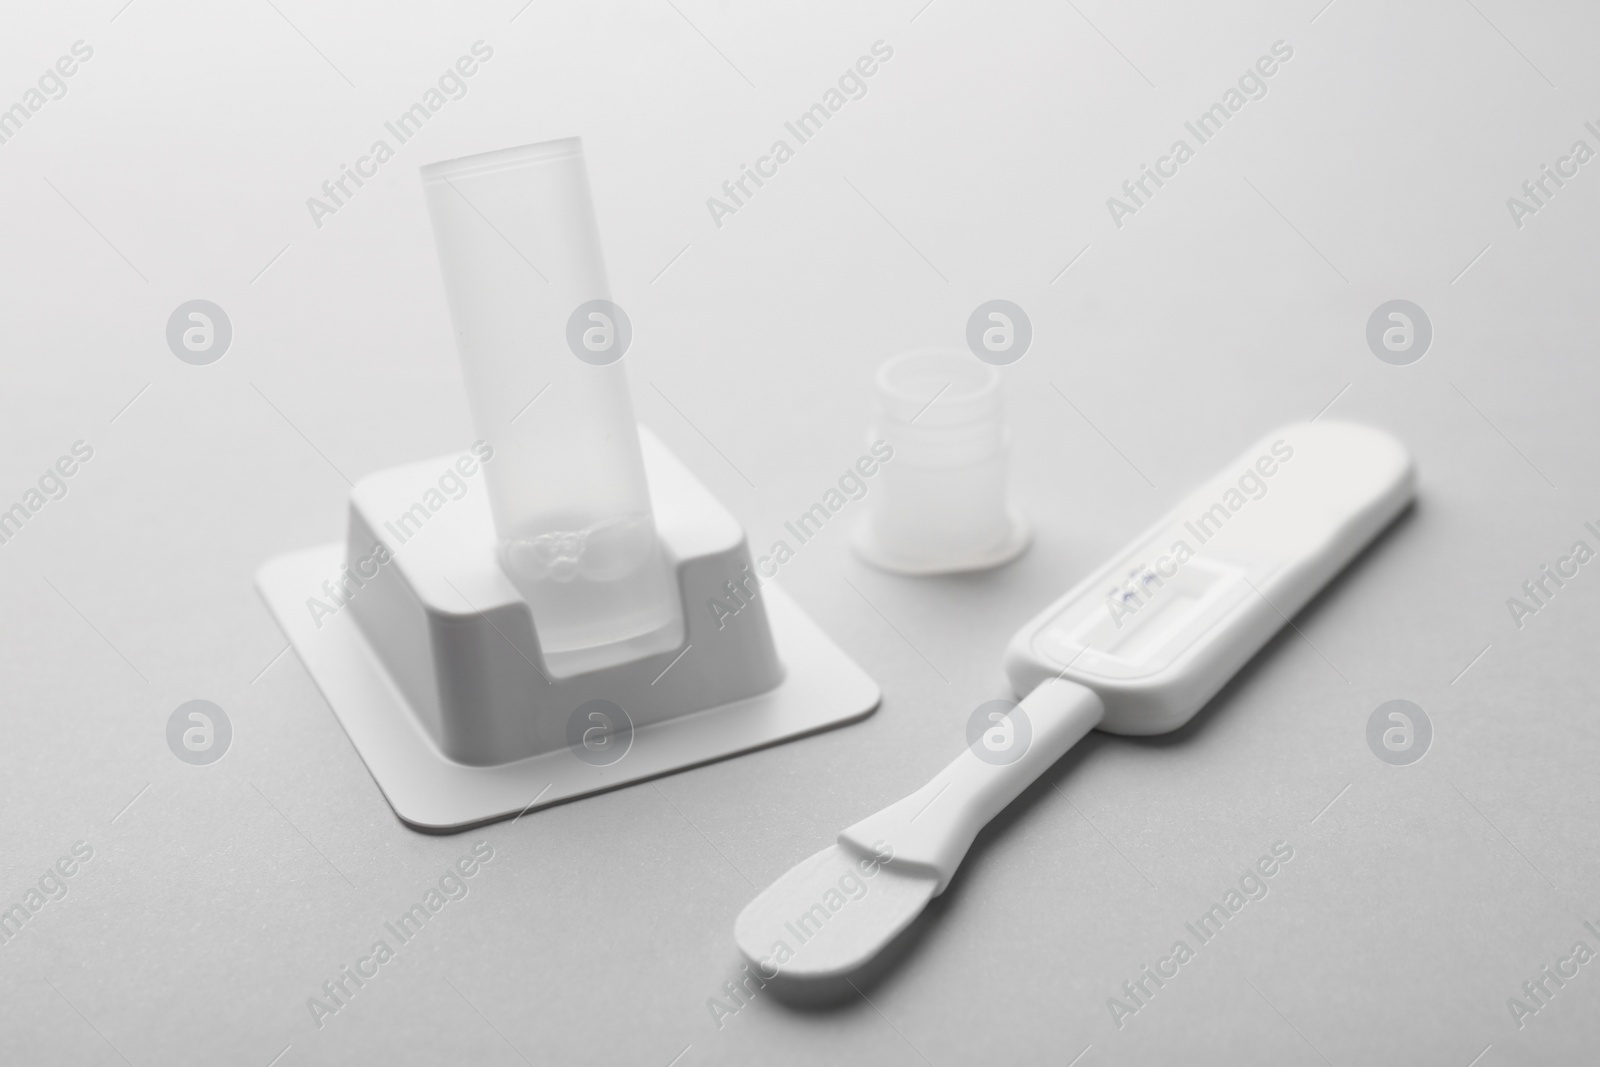 Photo of Disposable express test kit on light grey background